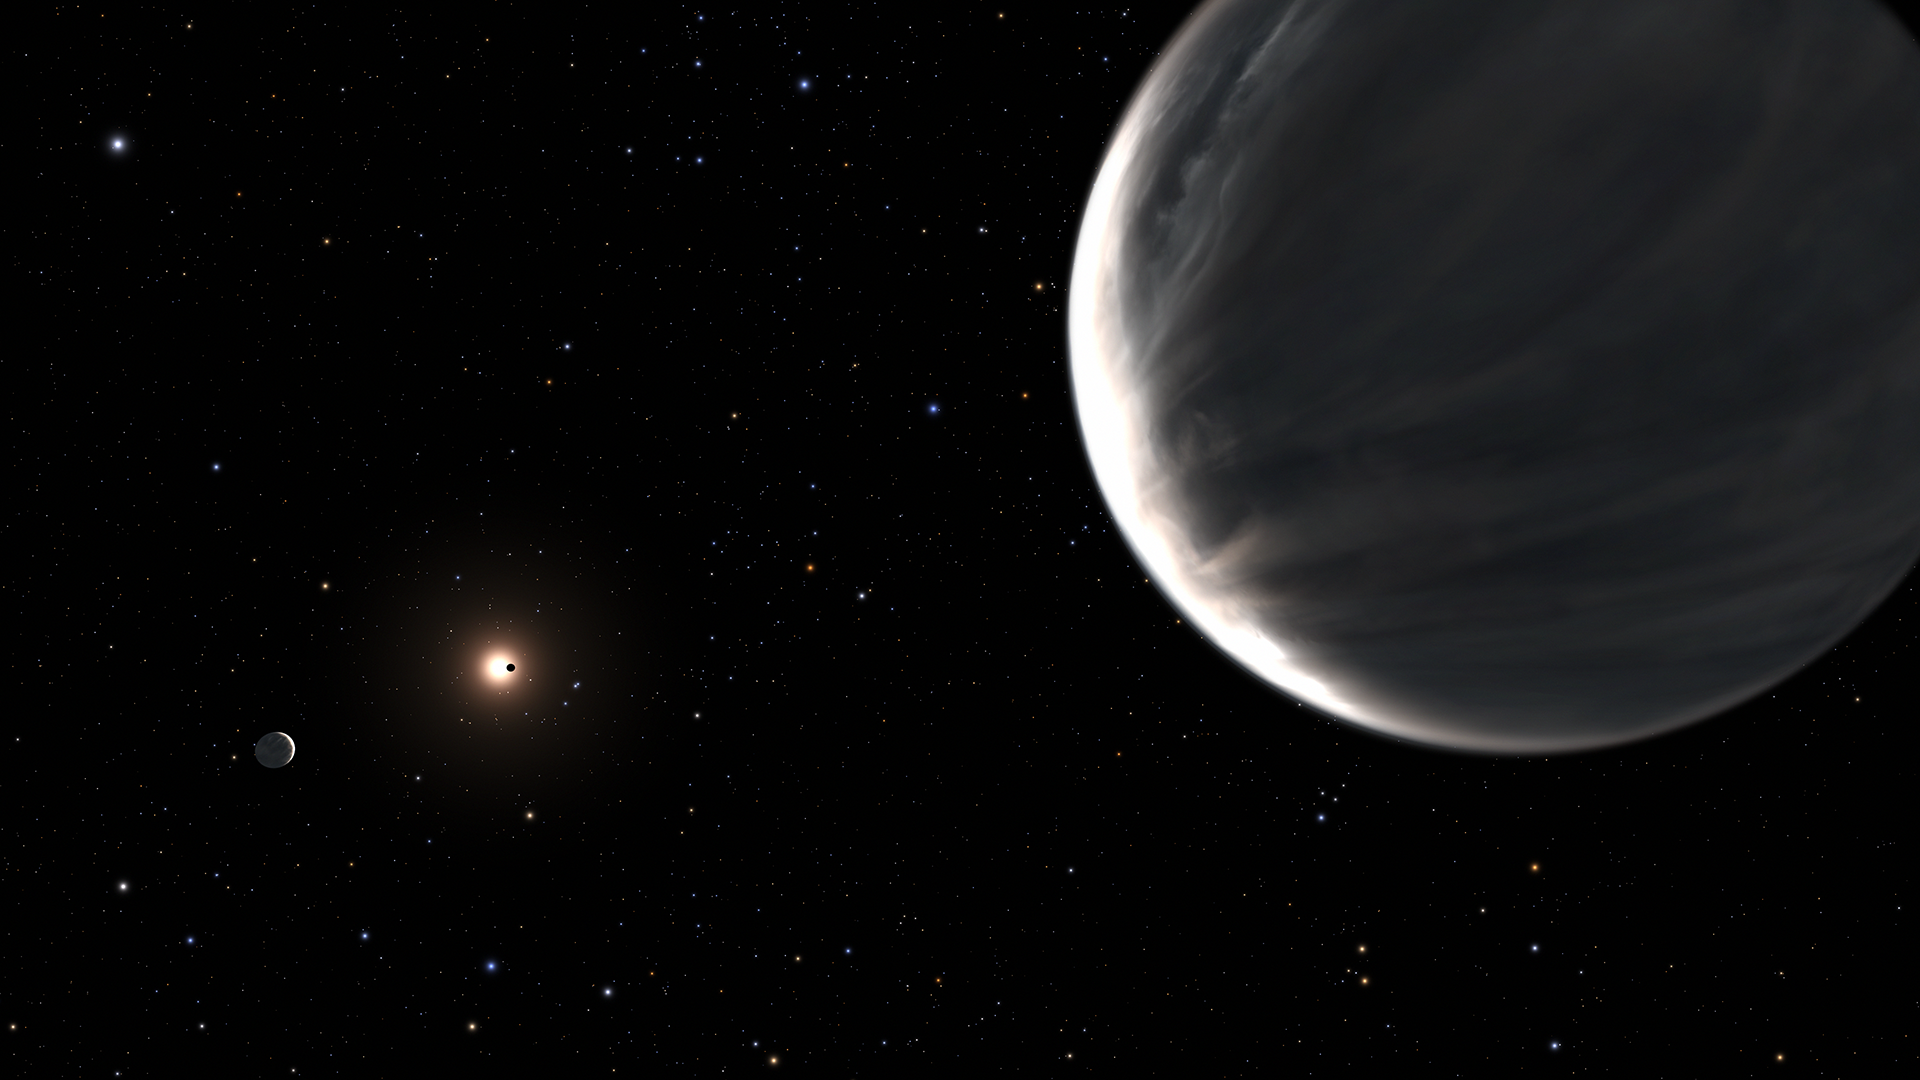 Upper right: a blue world with white, linear clouds illuminated as a crescent by a distant star to the lower left of the planet. Two other distant planets are visible, one passing in front of the star, the other to the lower left of the star.